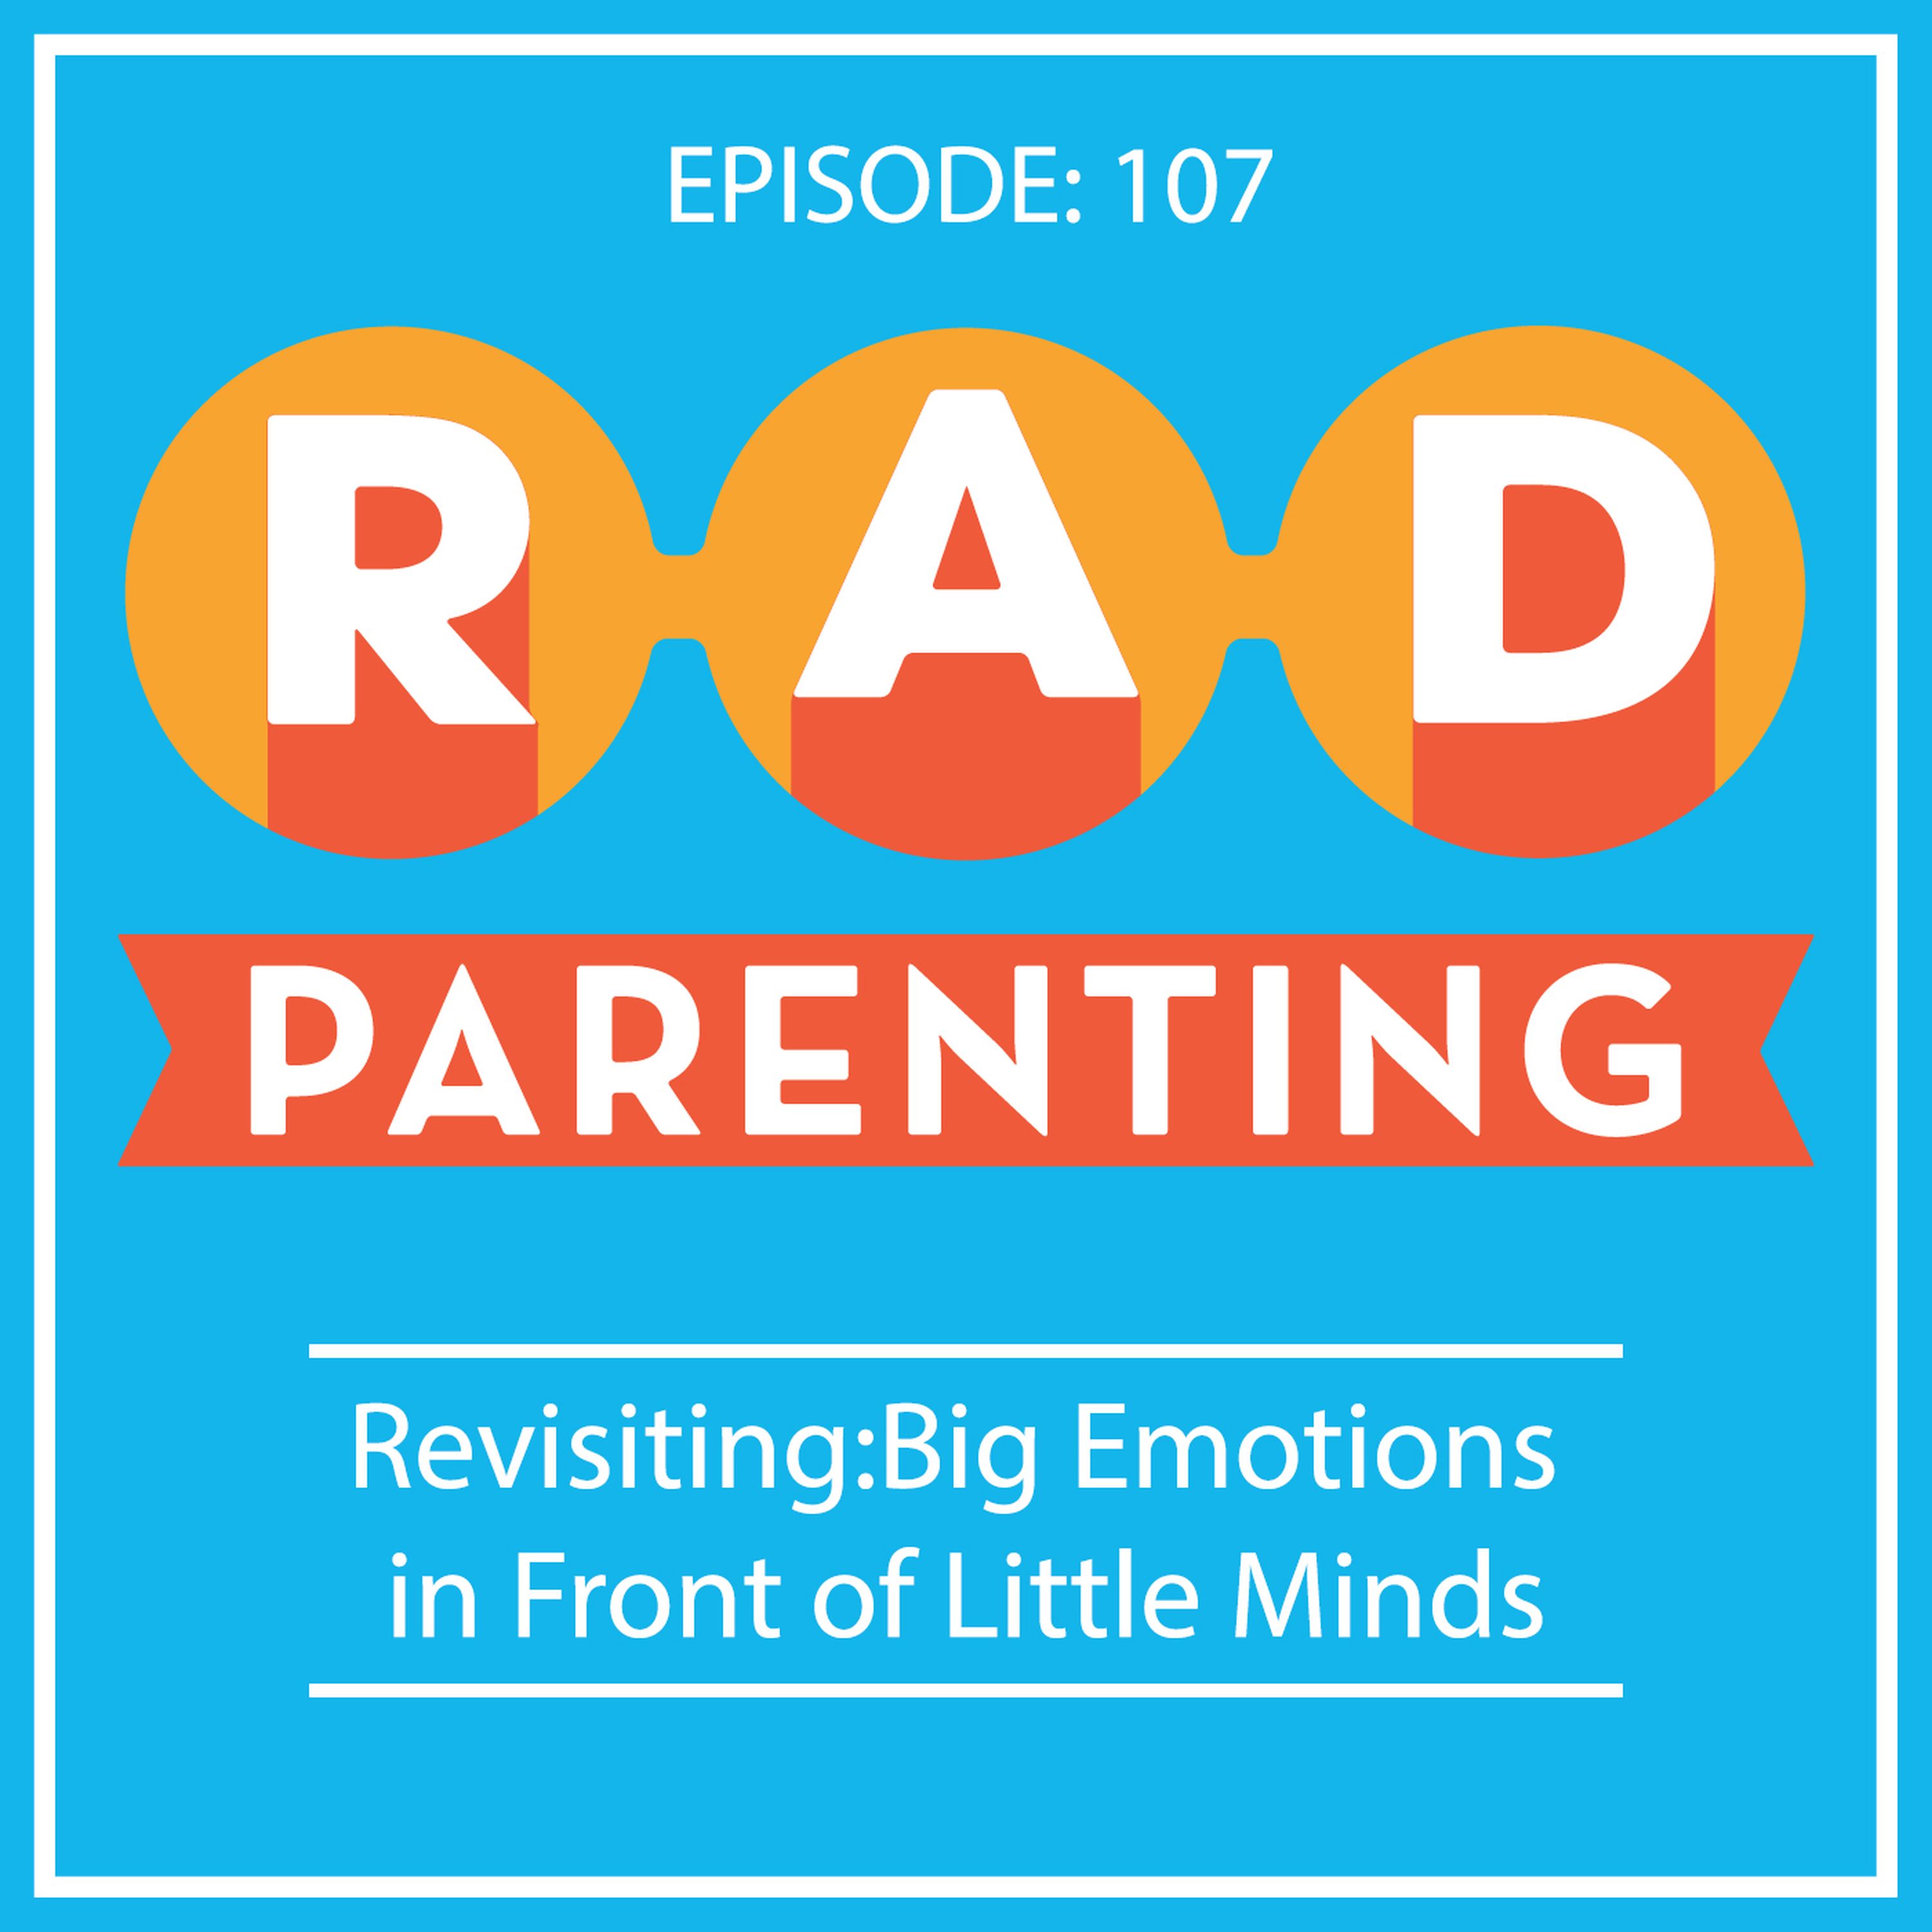 Revisiting:Big Emotions in Front of Little Minds